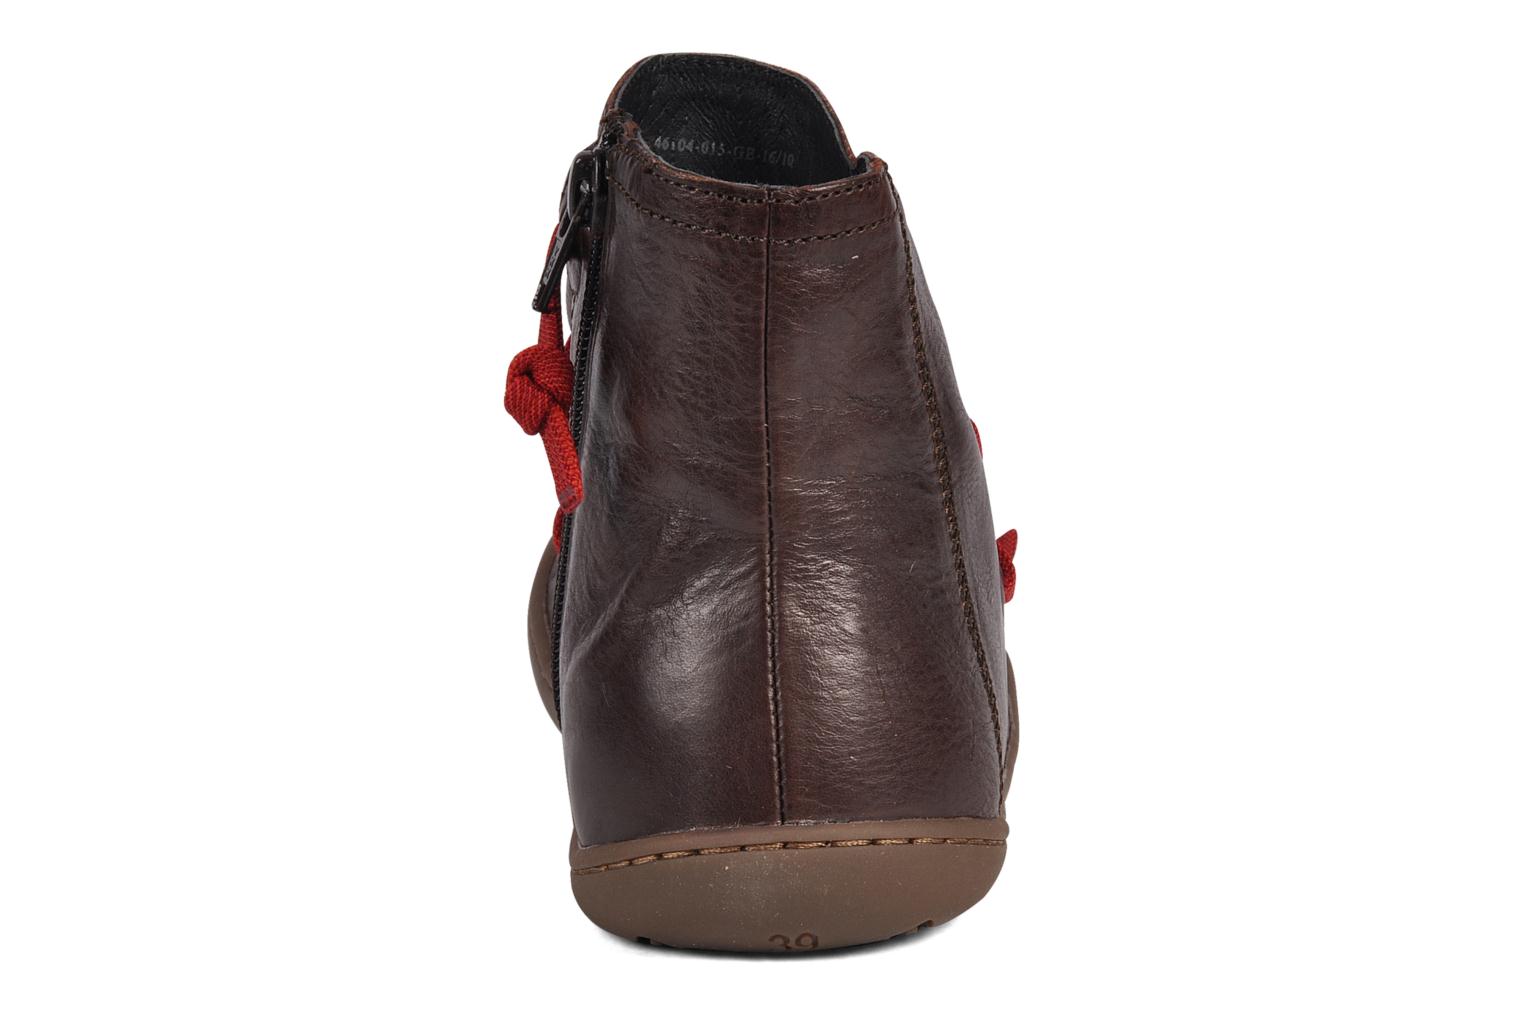 Camper Peu Cami 46104 Ankle boots in Brown at Sarenza.co.uk (47570)